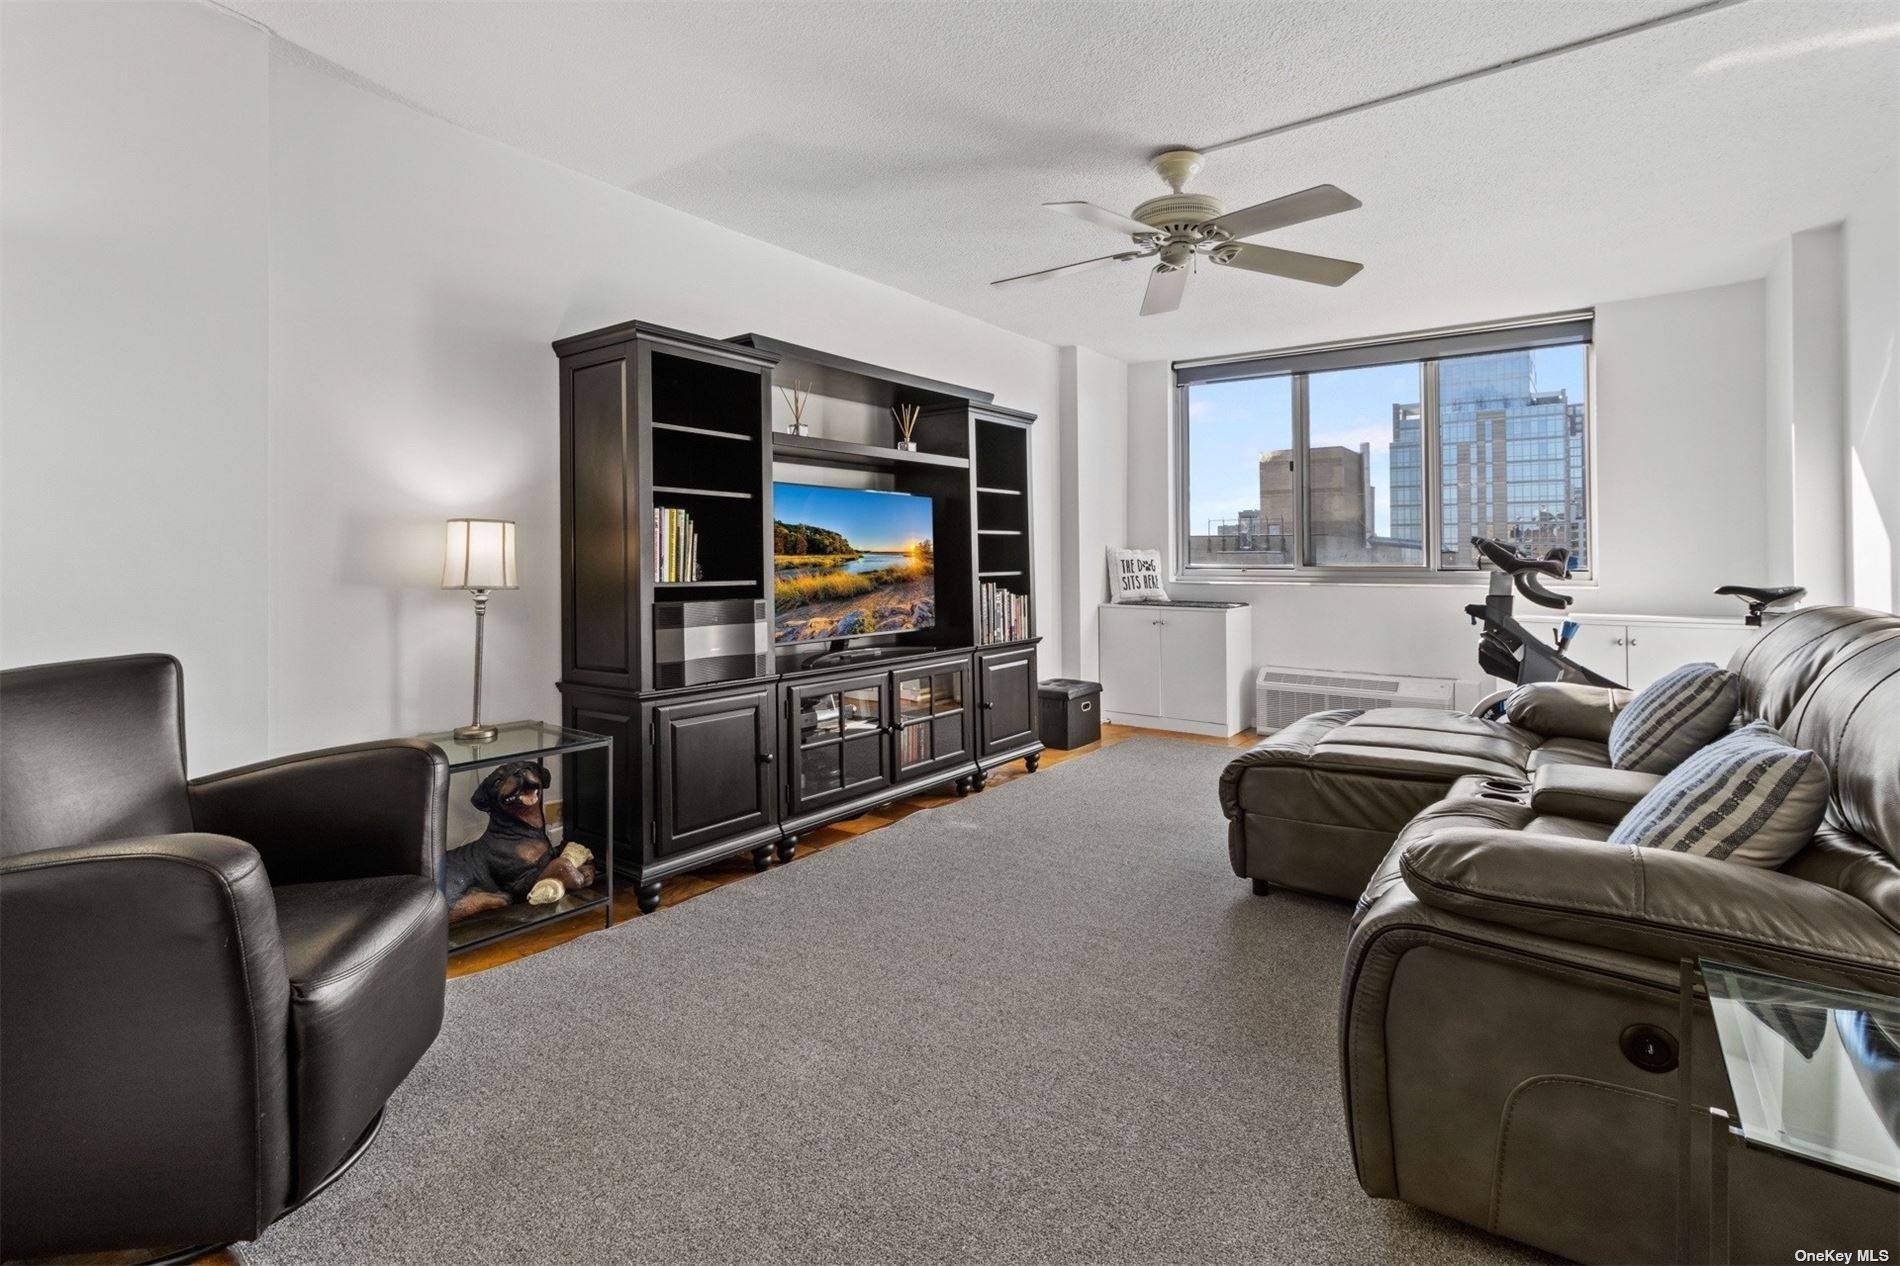 Top floor, sun drenched southern exposure with breathtaking skyline views to Midtown Manhattan.